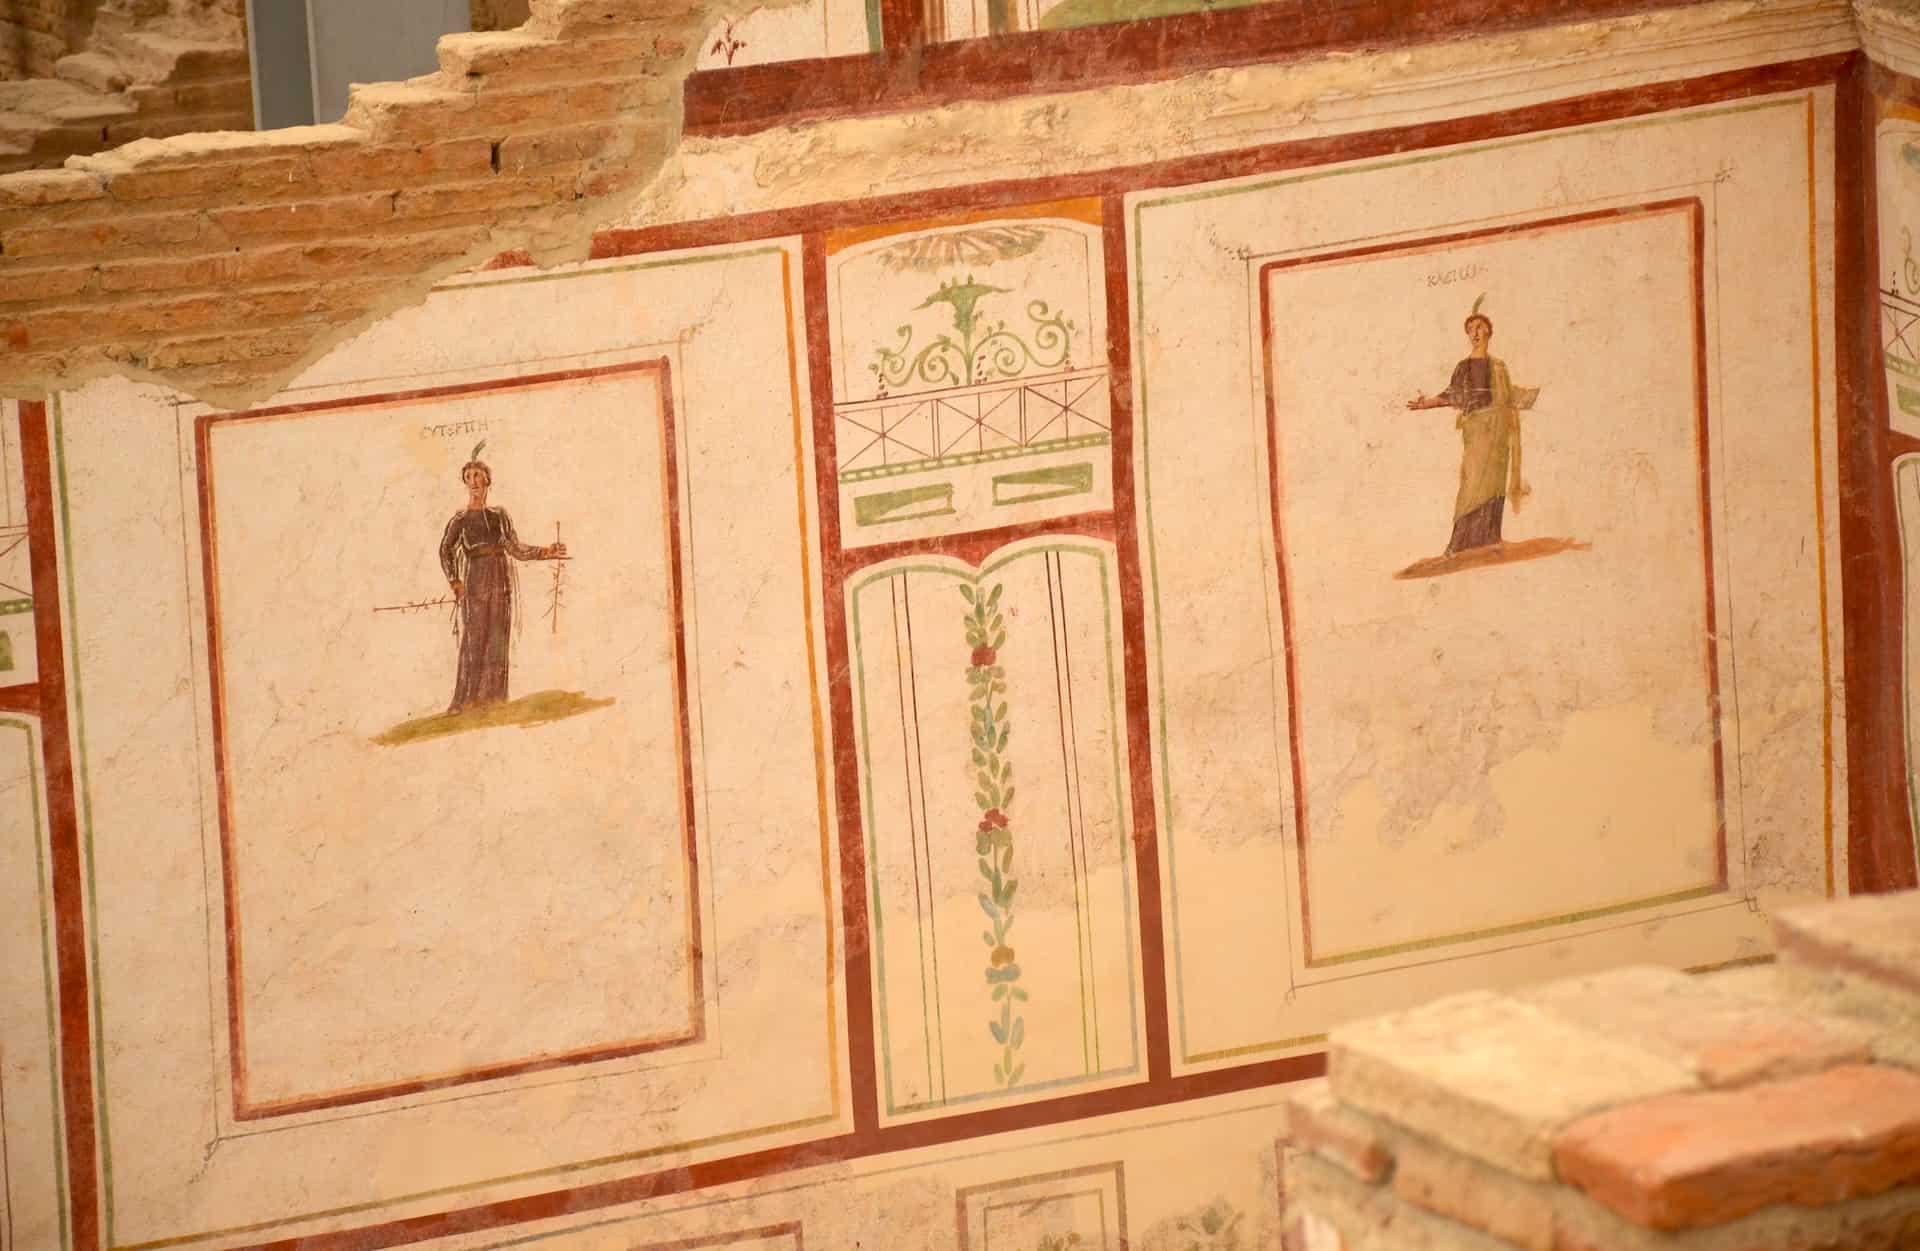 Frescoes of Euterpe (left) and Clio (right) in the Room of the Muses in Dwelling Unit 3 in the Terrace Houses at Ephesus